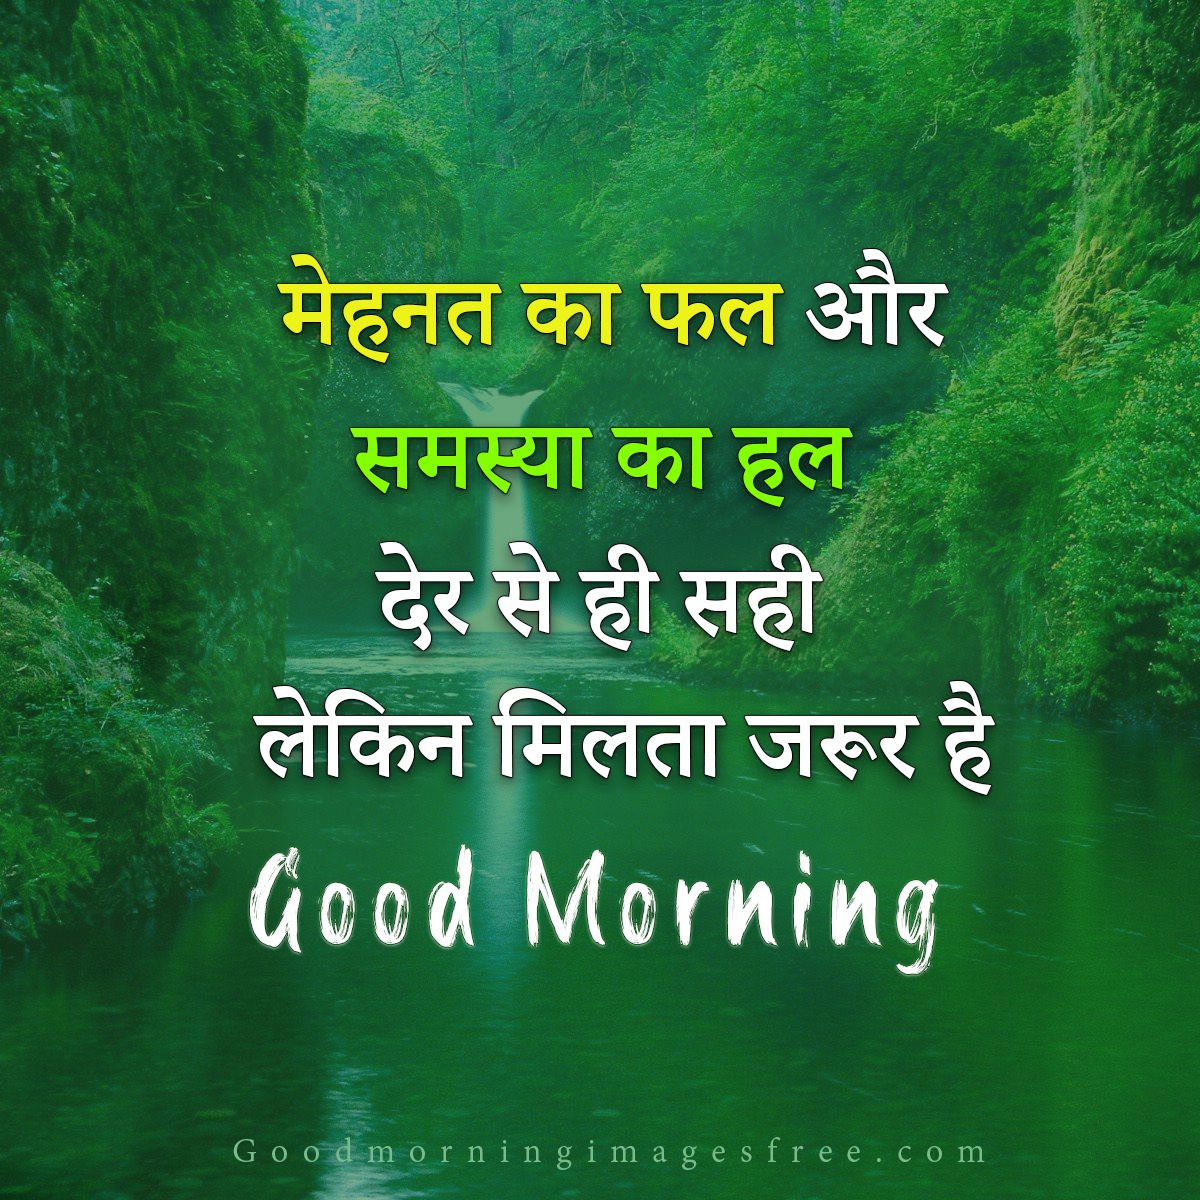 Good Morning Quotes in Hindi Wishes for Good Life